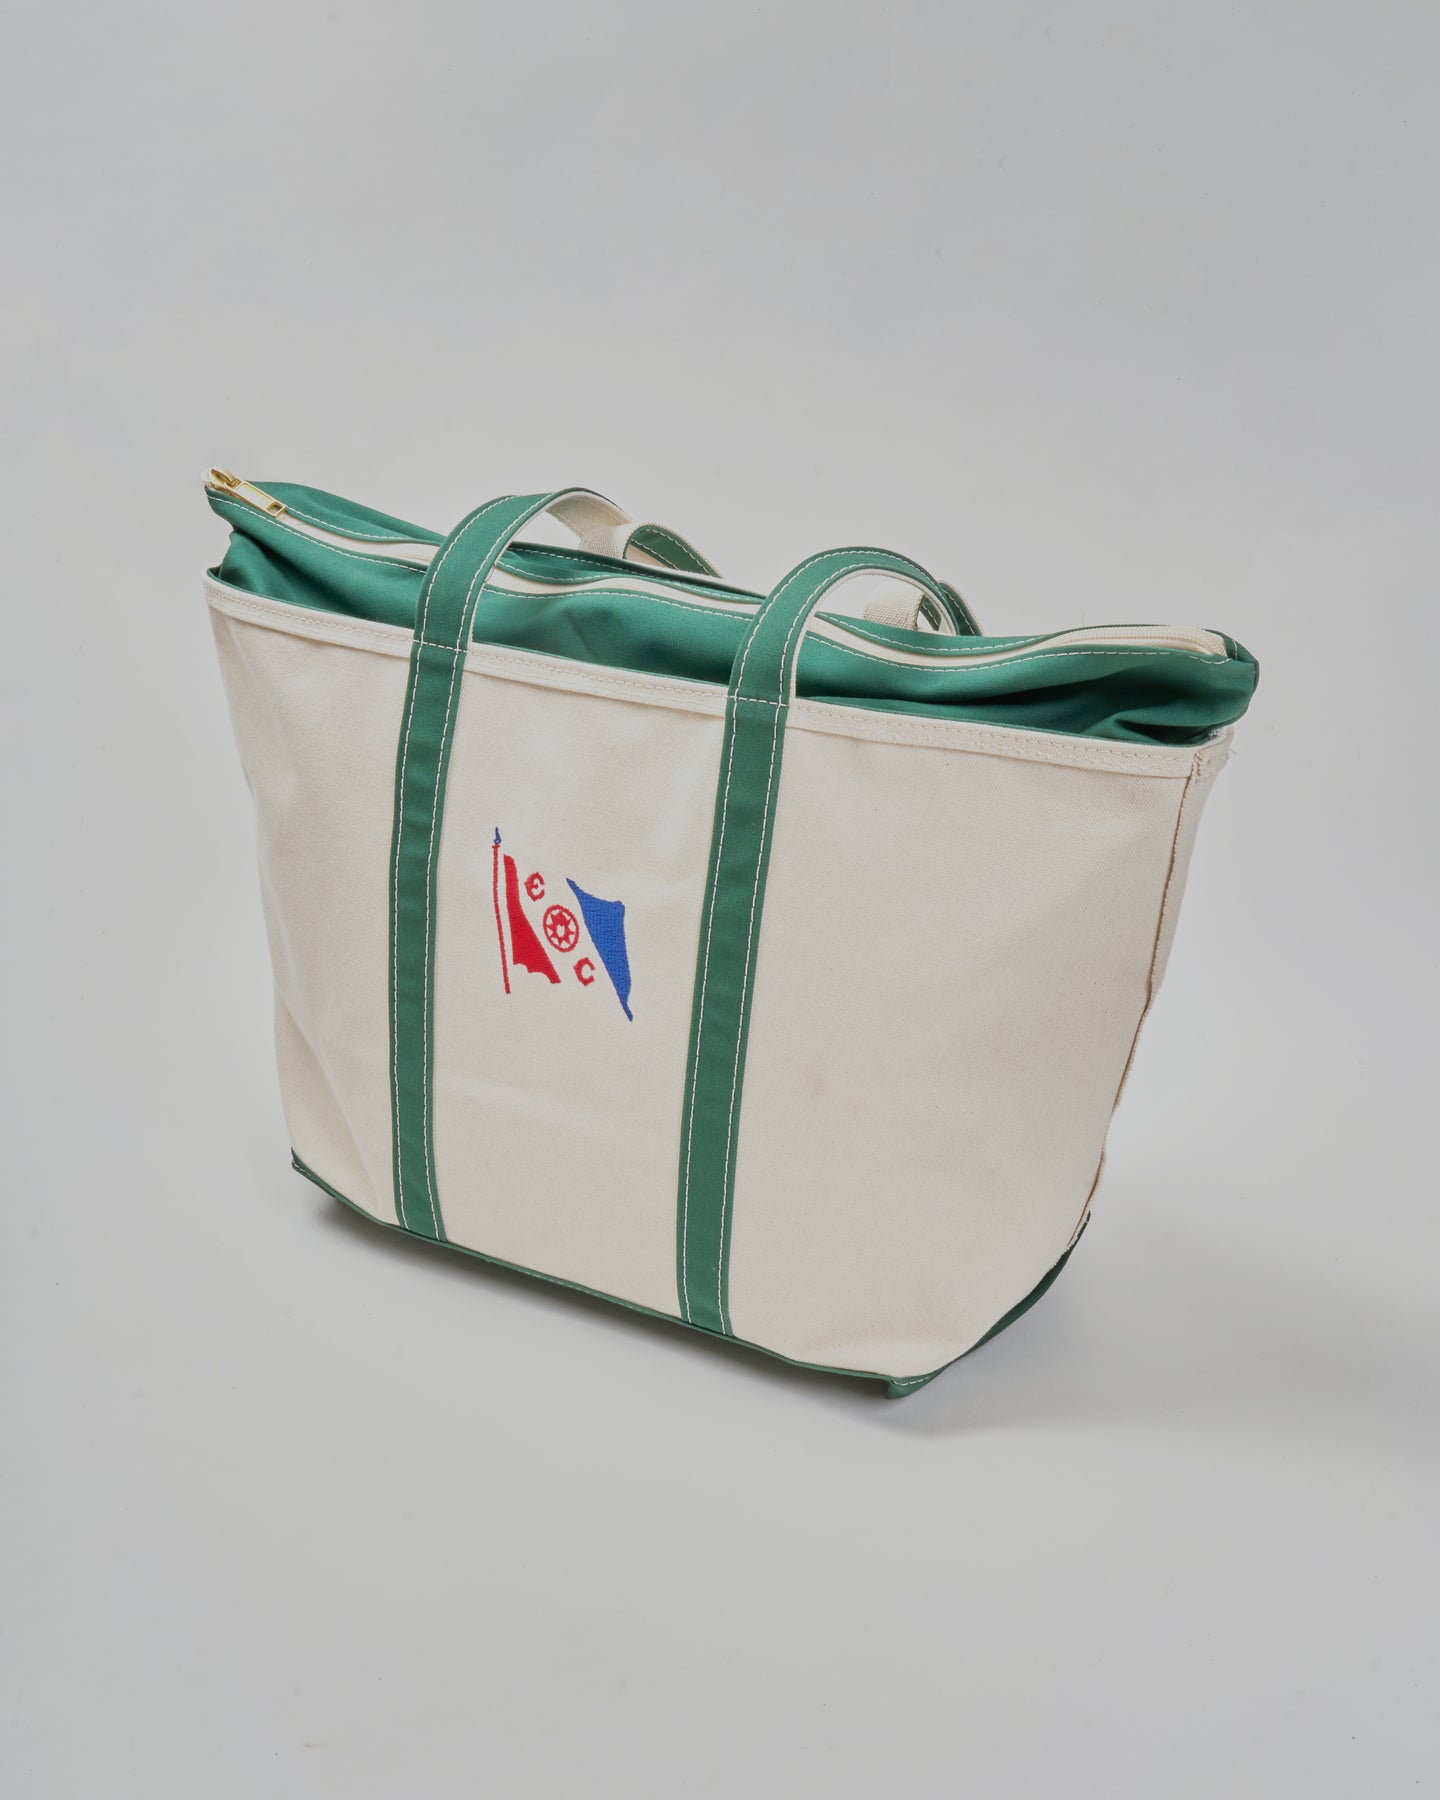 Large Boat Tote and Pouch SET Zippered Tote With Handles 